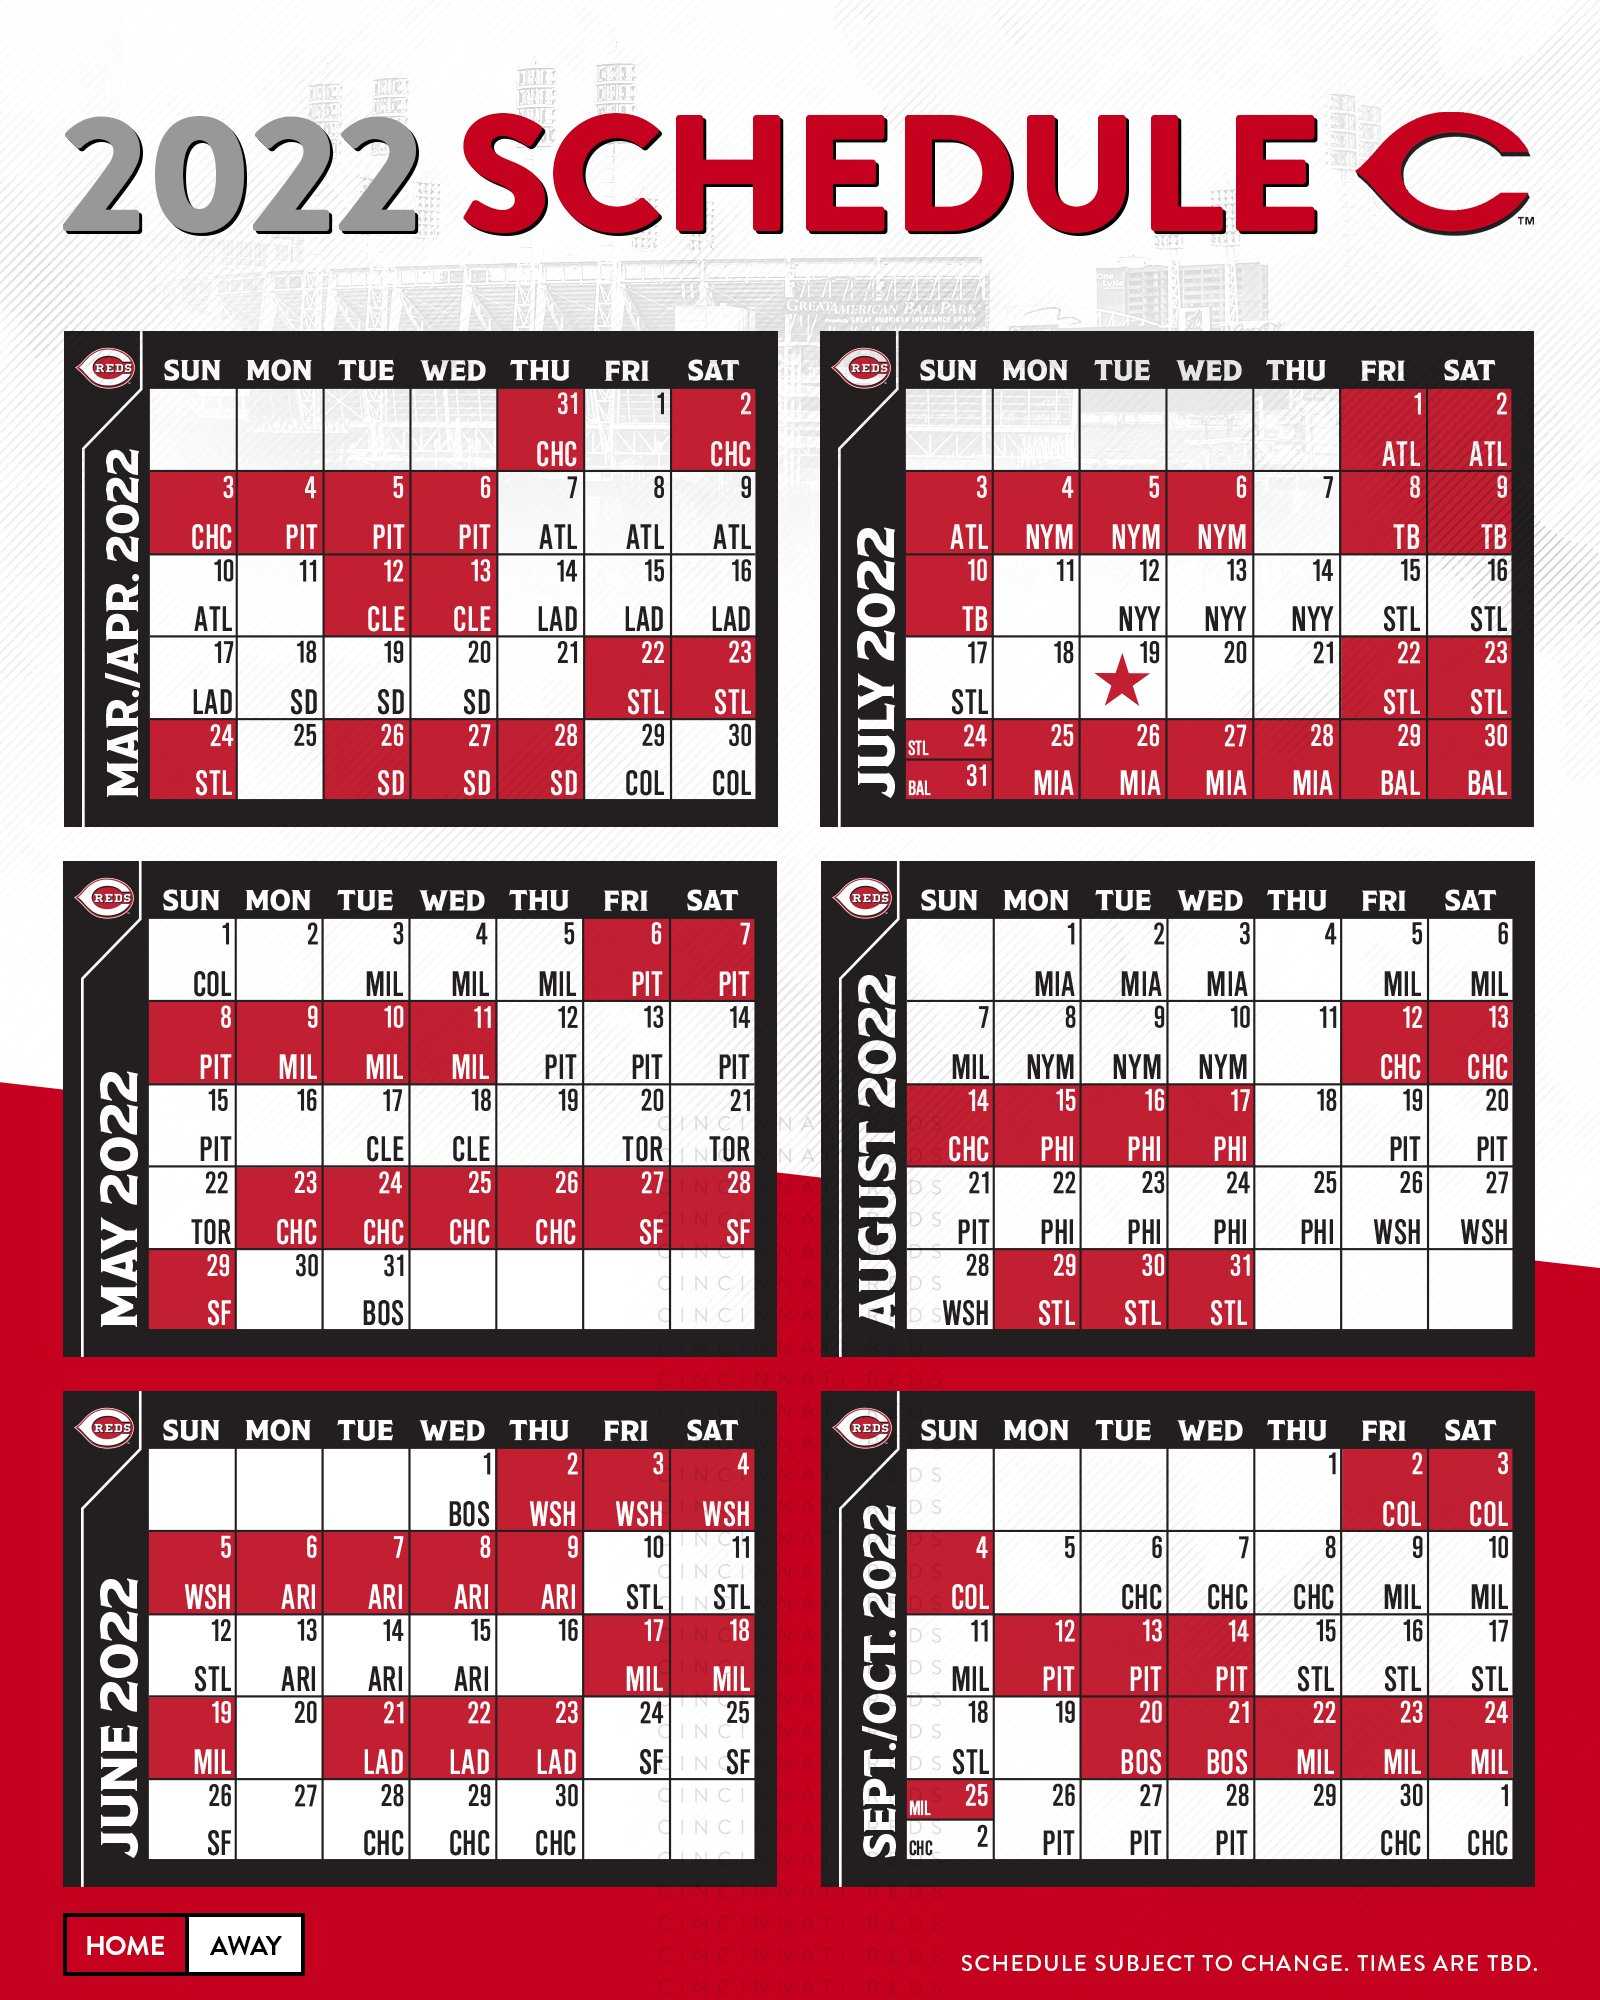 Mlb Schedule July 2022 Cincinnati Reds Release 2022 Schedule: Here Are The Highlights